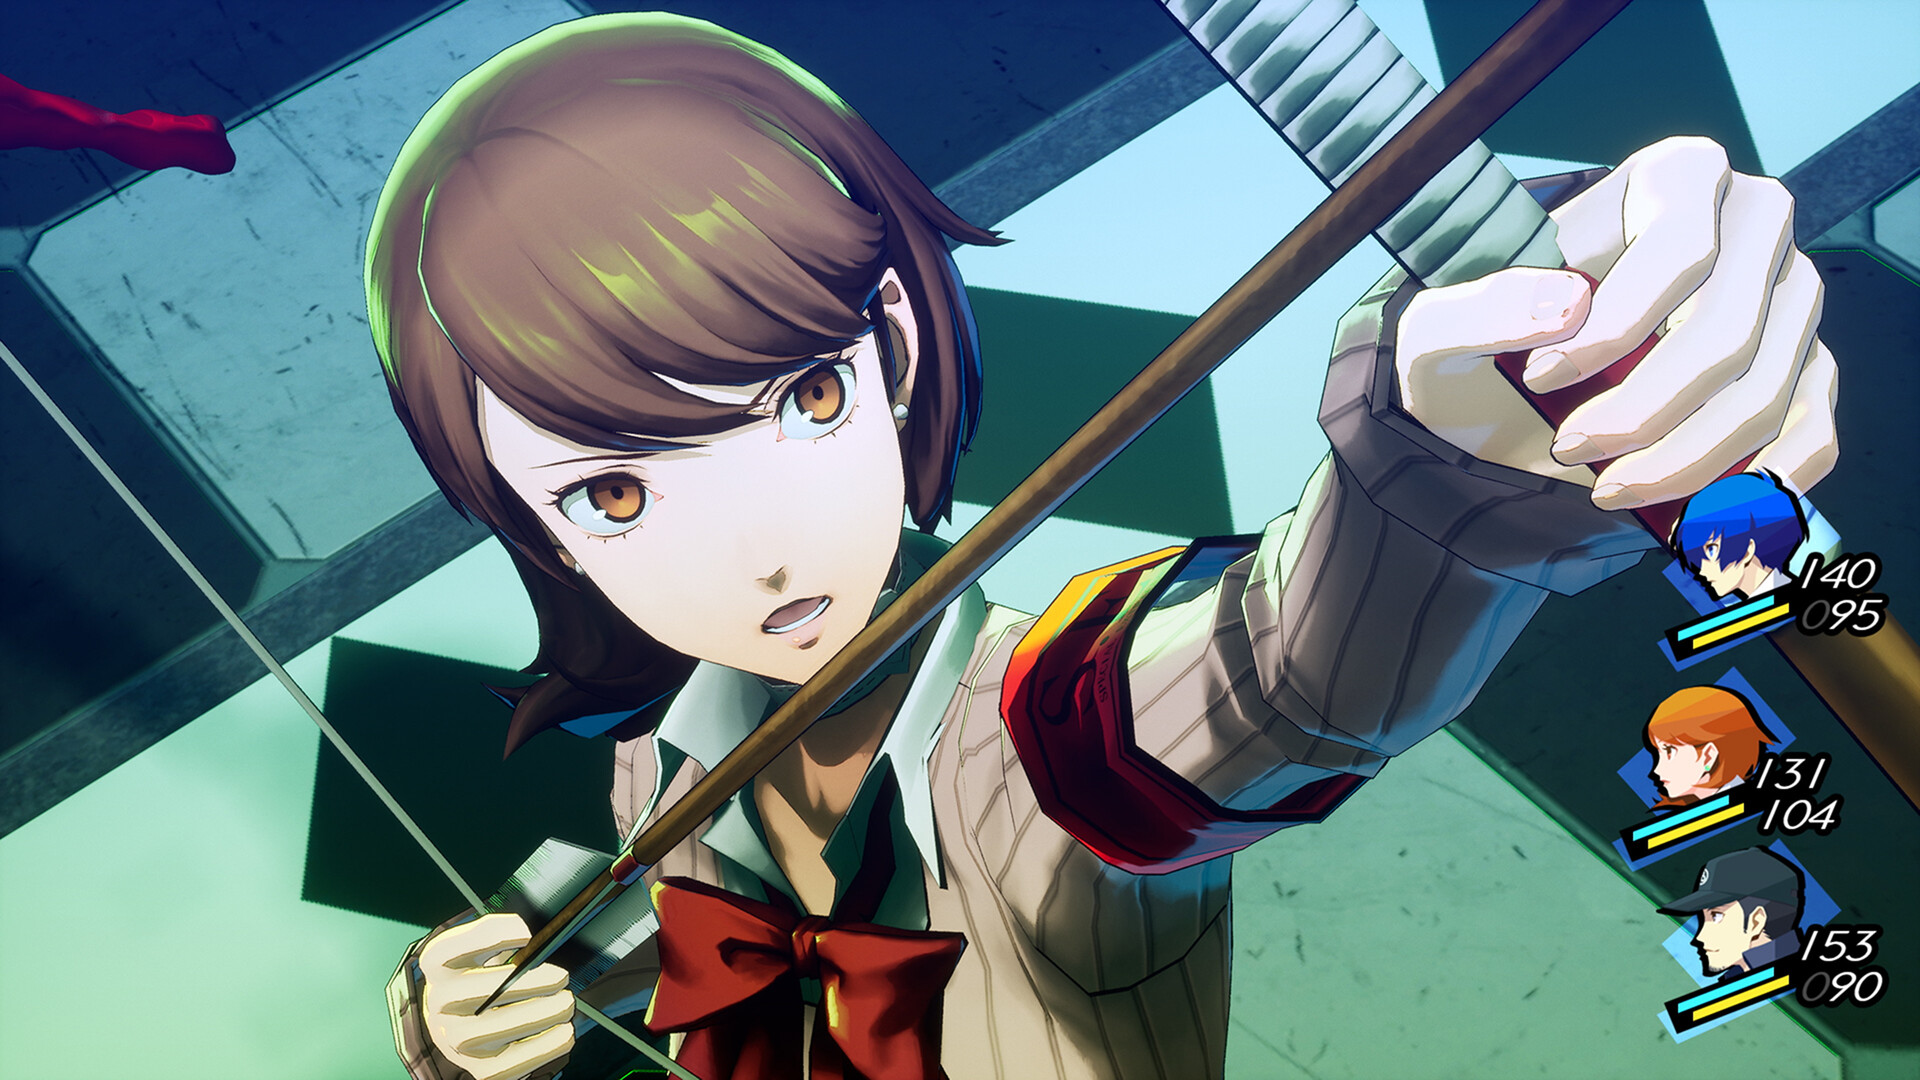 Persona 3 Reload launches sooner than expected next year